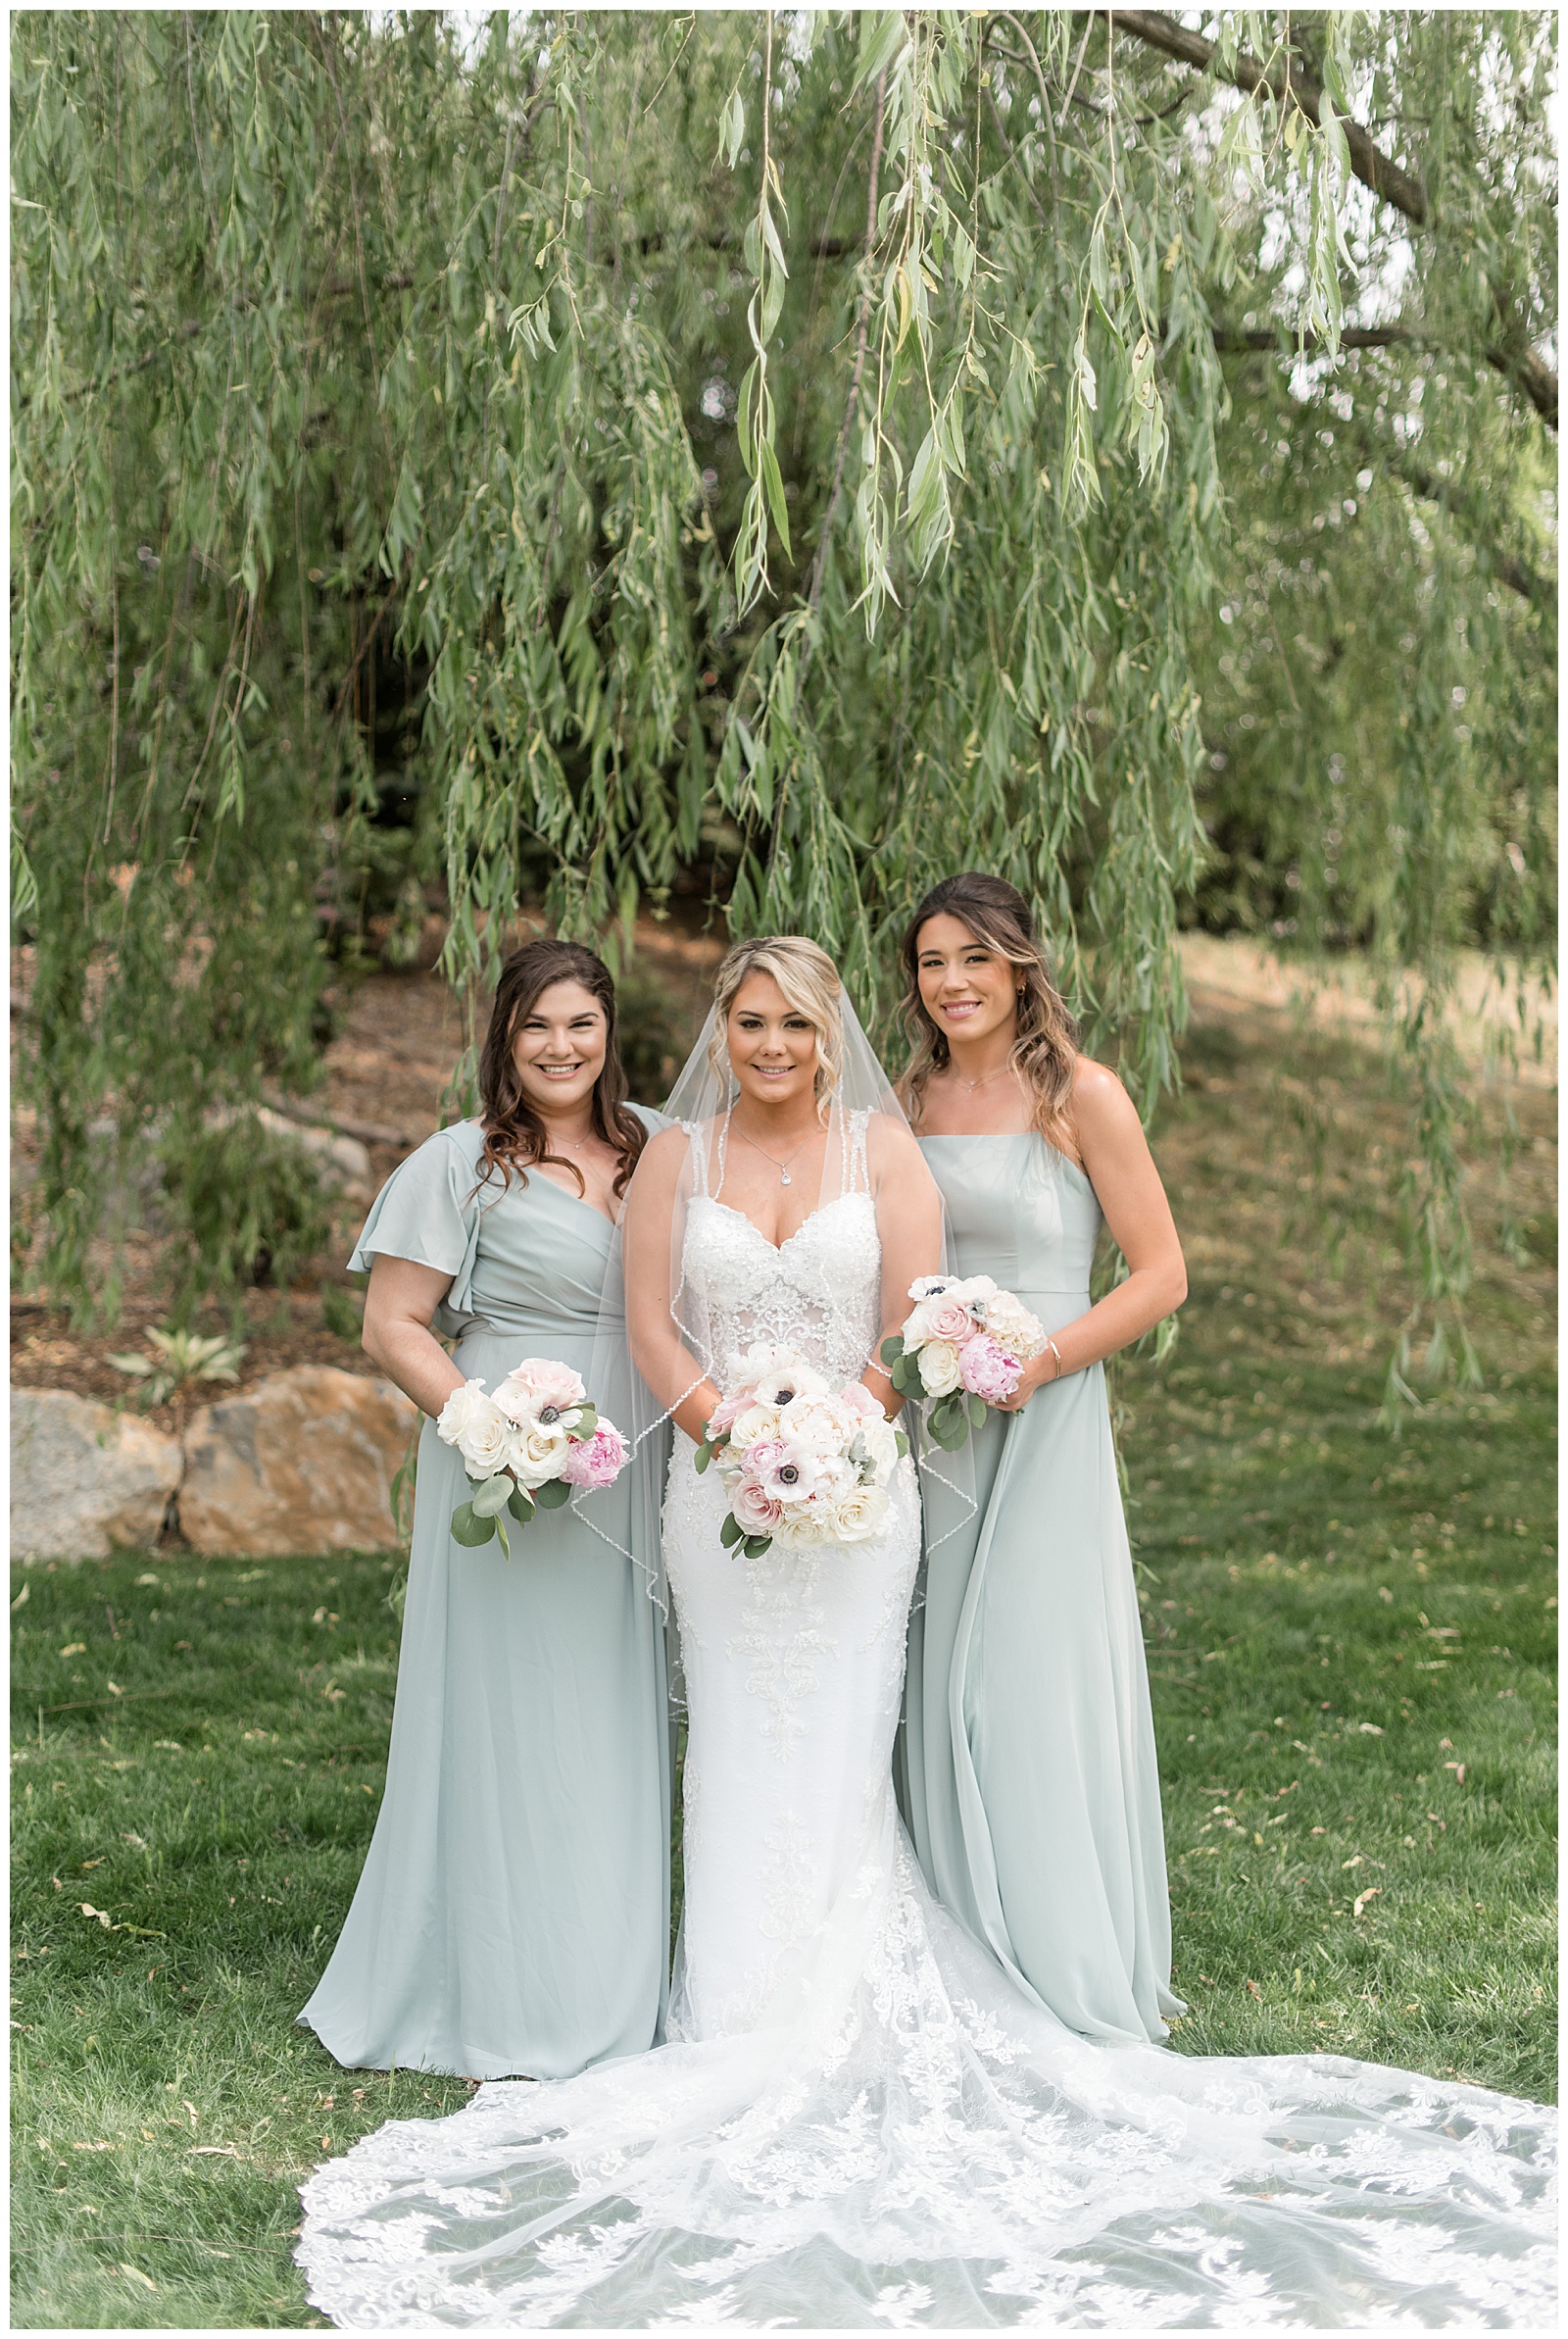 bride with two of her maids of honor holding bouquets under willow tree at barn wedding venue in lancaster county pennsylvania